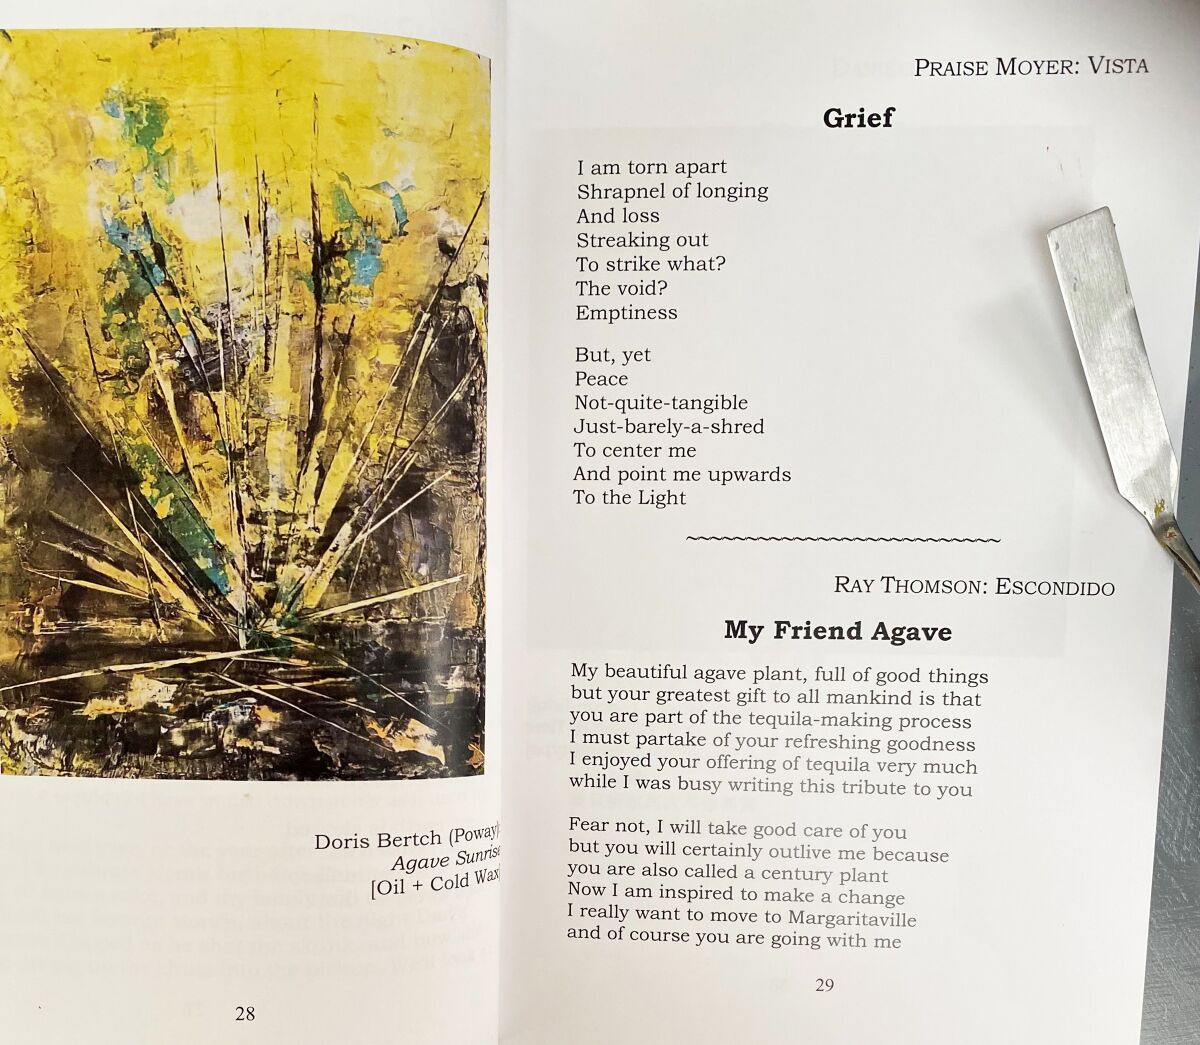 Doris Bertch’s “Agave Sunrise” and the two published poems it inspired.